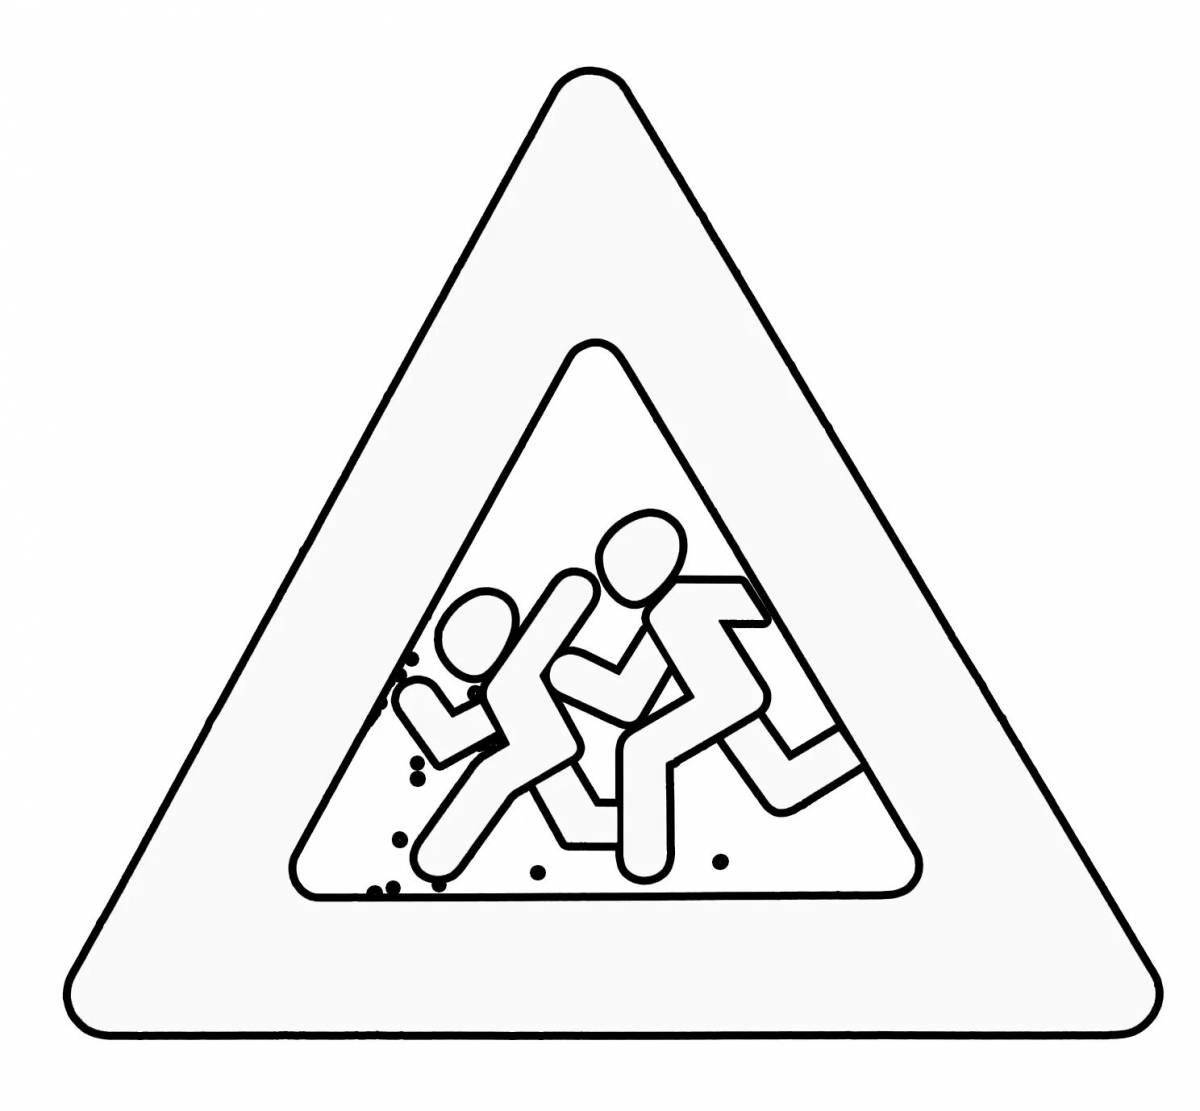 Awesome no traffic signs coloring page